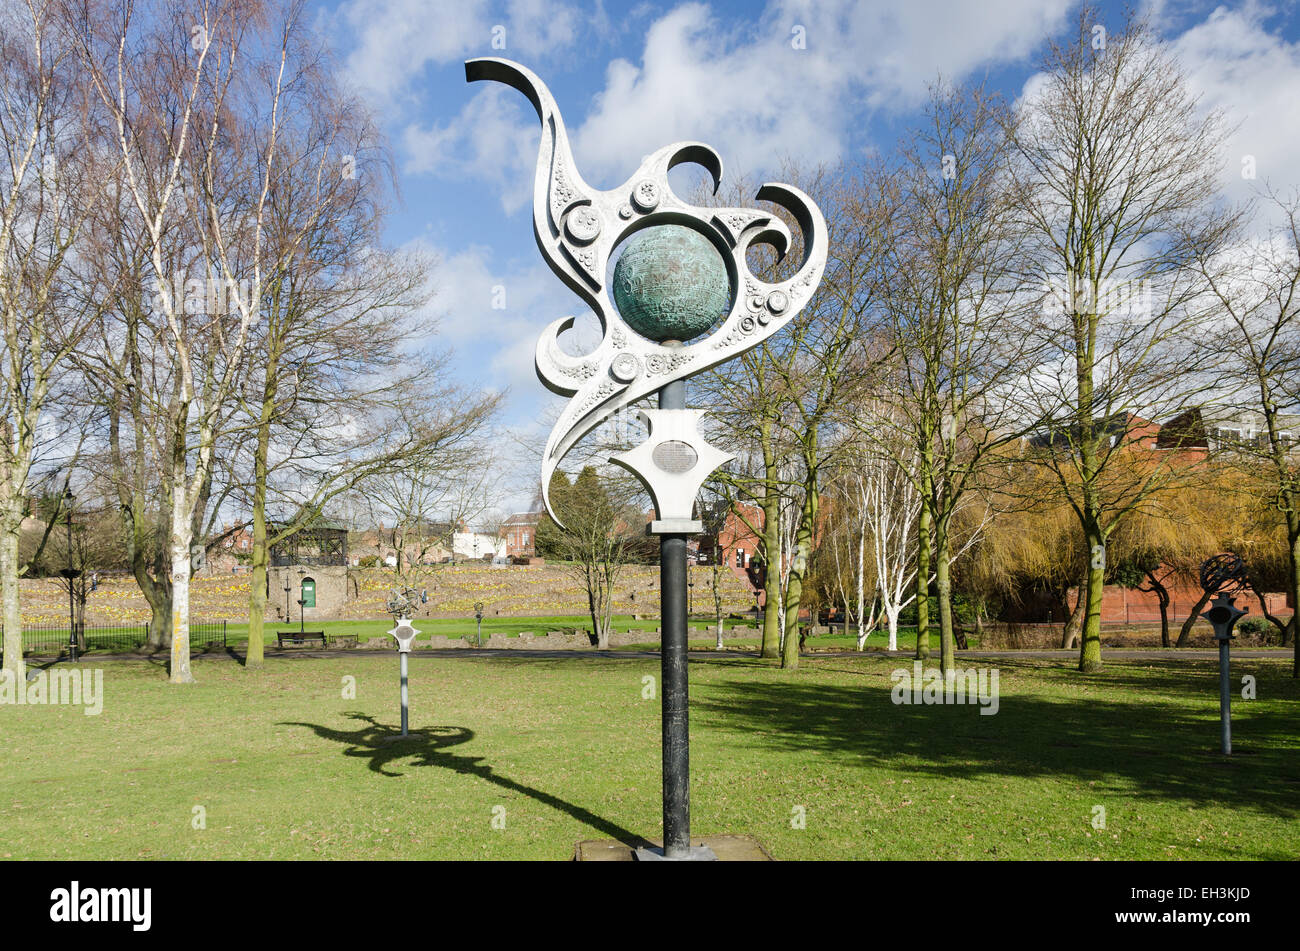 Model of the Sun, one of the exhibits in the Tamworth Planet Walk Sculpture Trail in the Pleasure Grounds, Tamworth Stock Photo